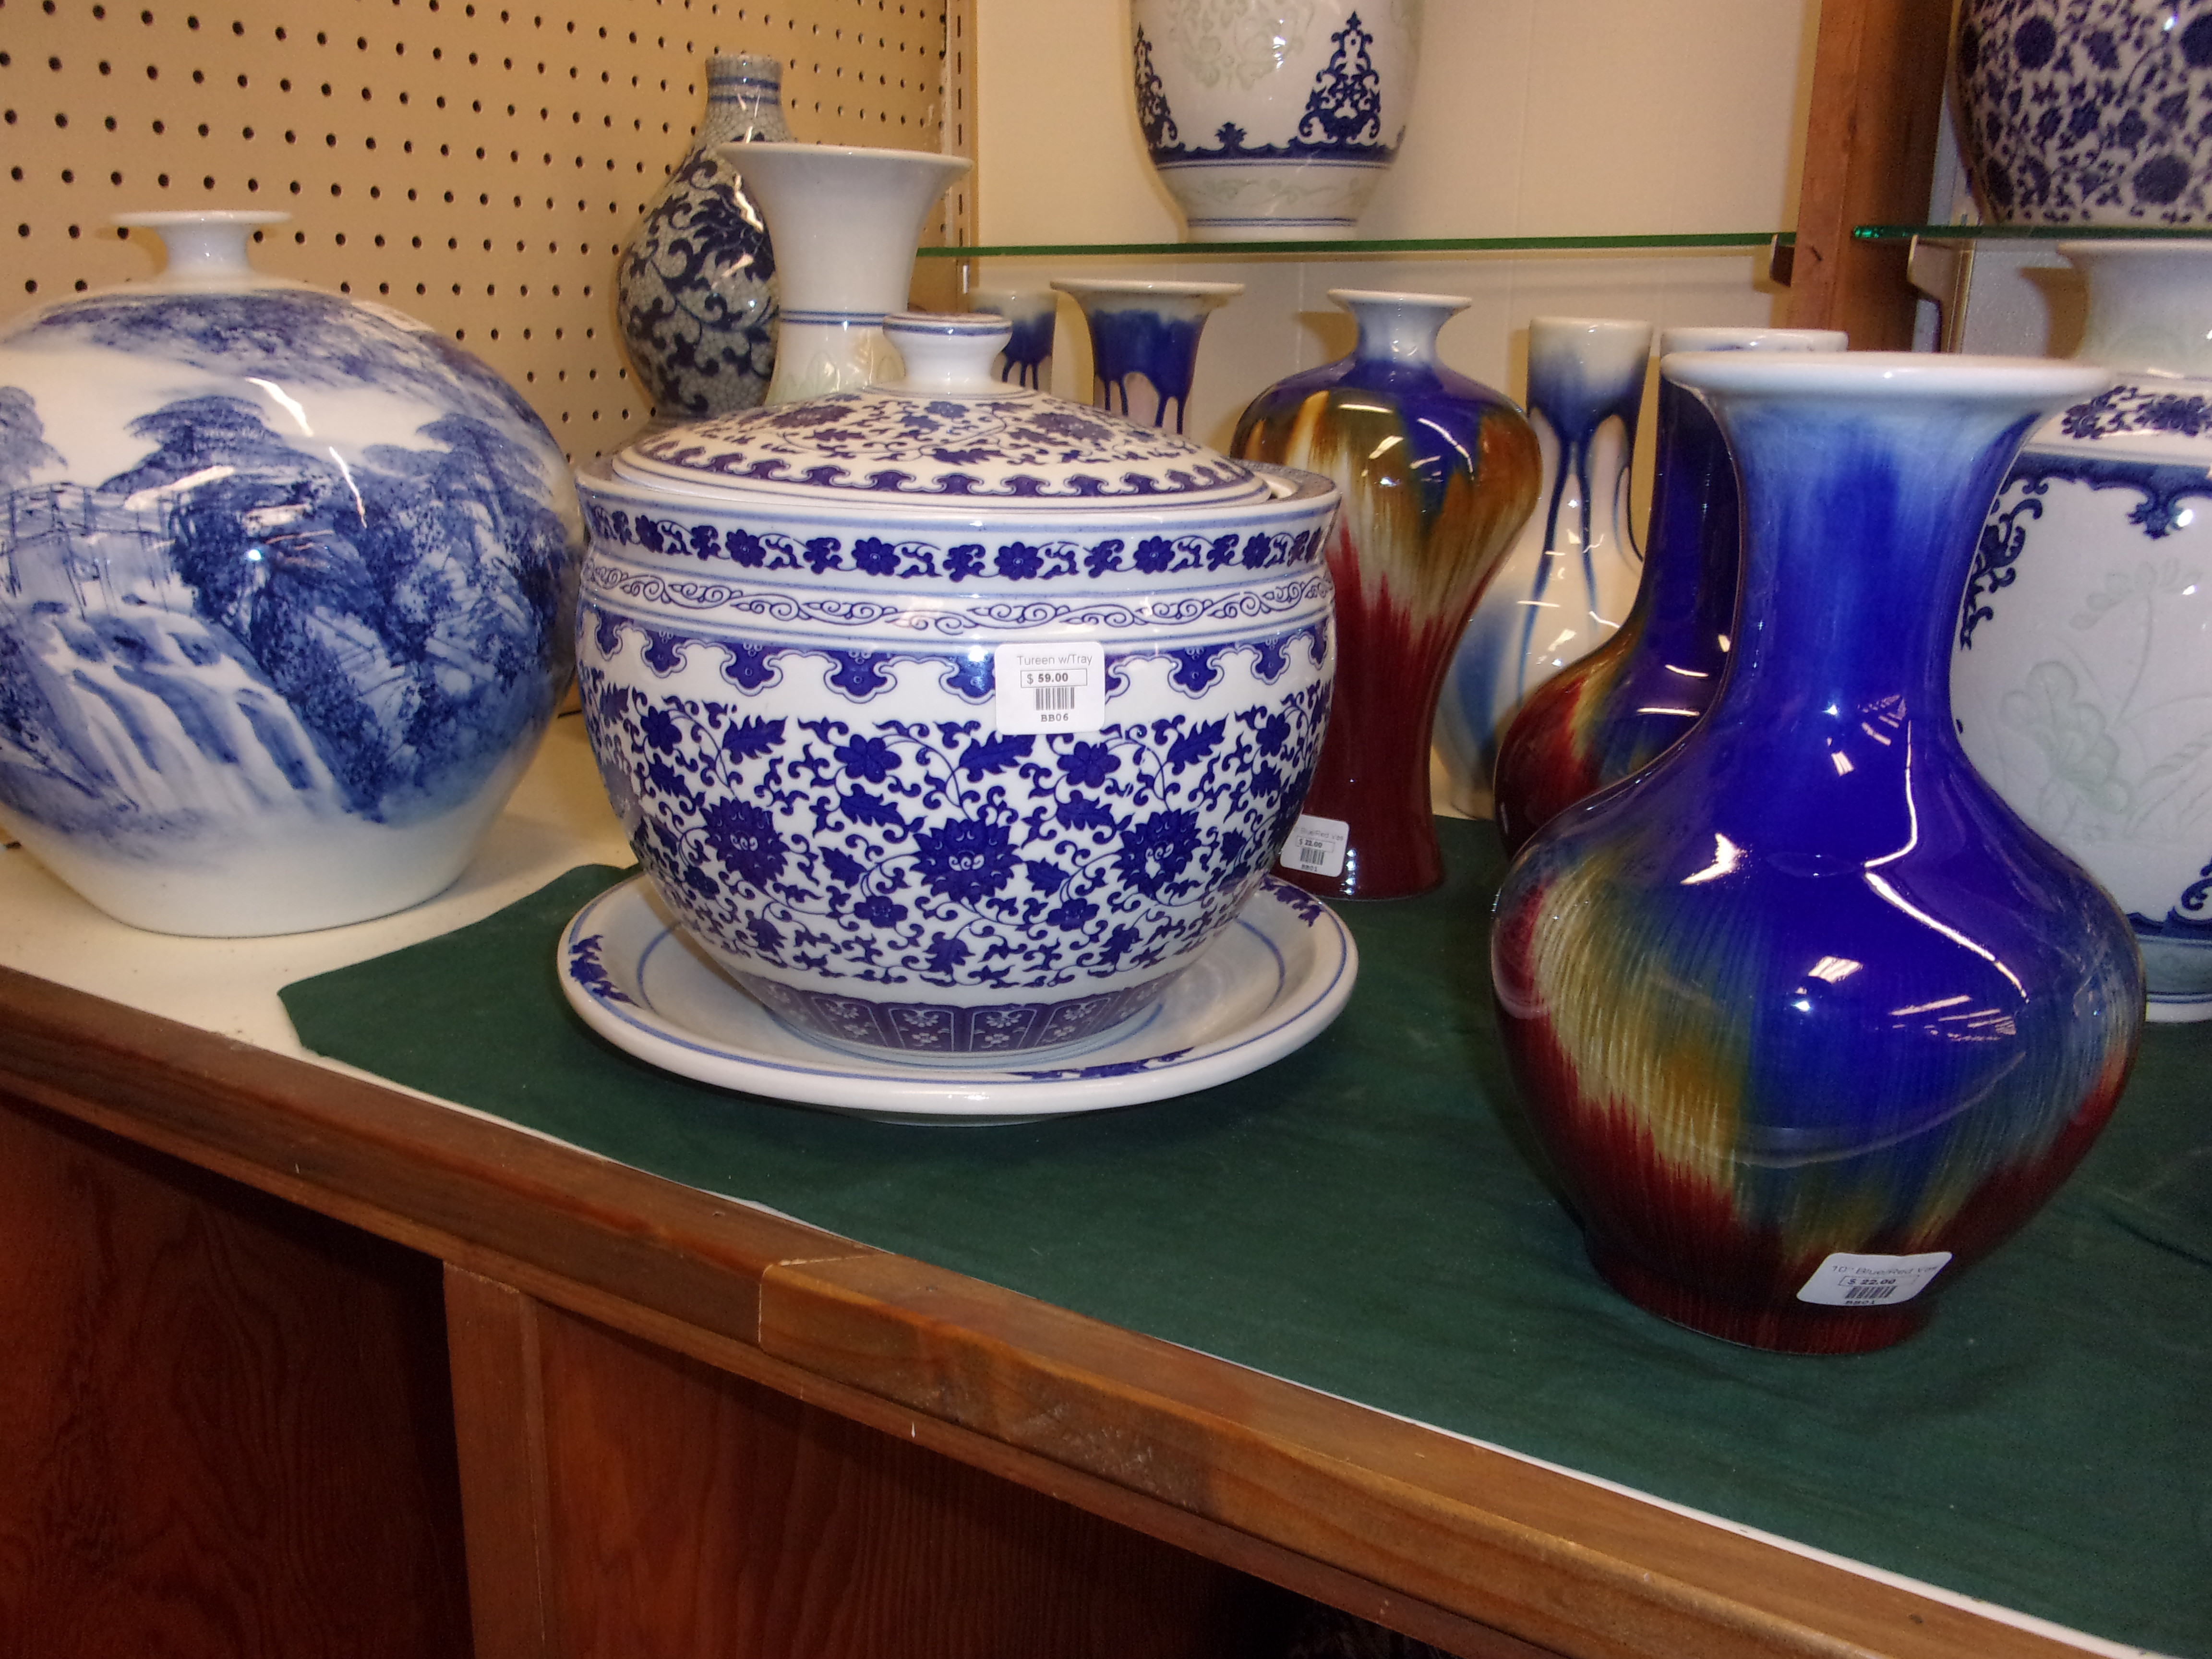 Ebay Vases for Sale Of Zanesville Pottery Your Exclusive Pottery Retailer Intended for Items Selling now On Ebay A